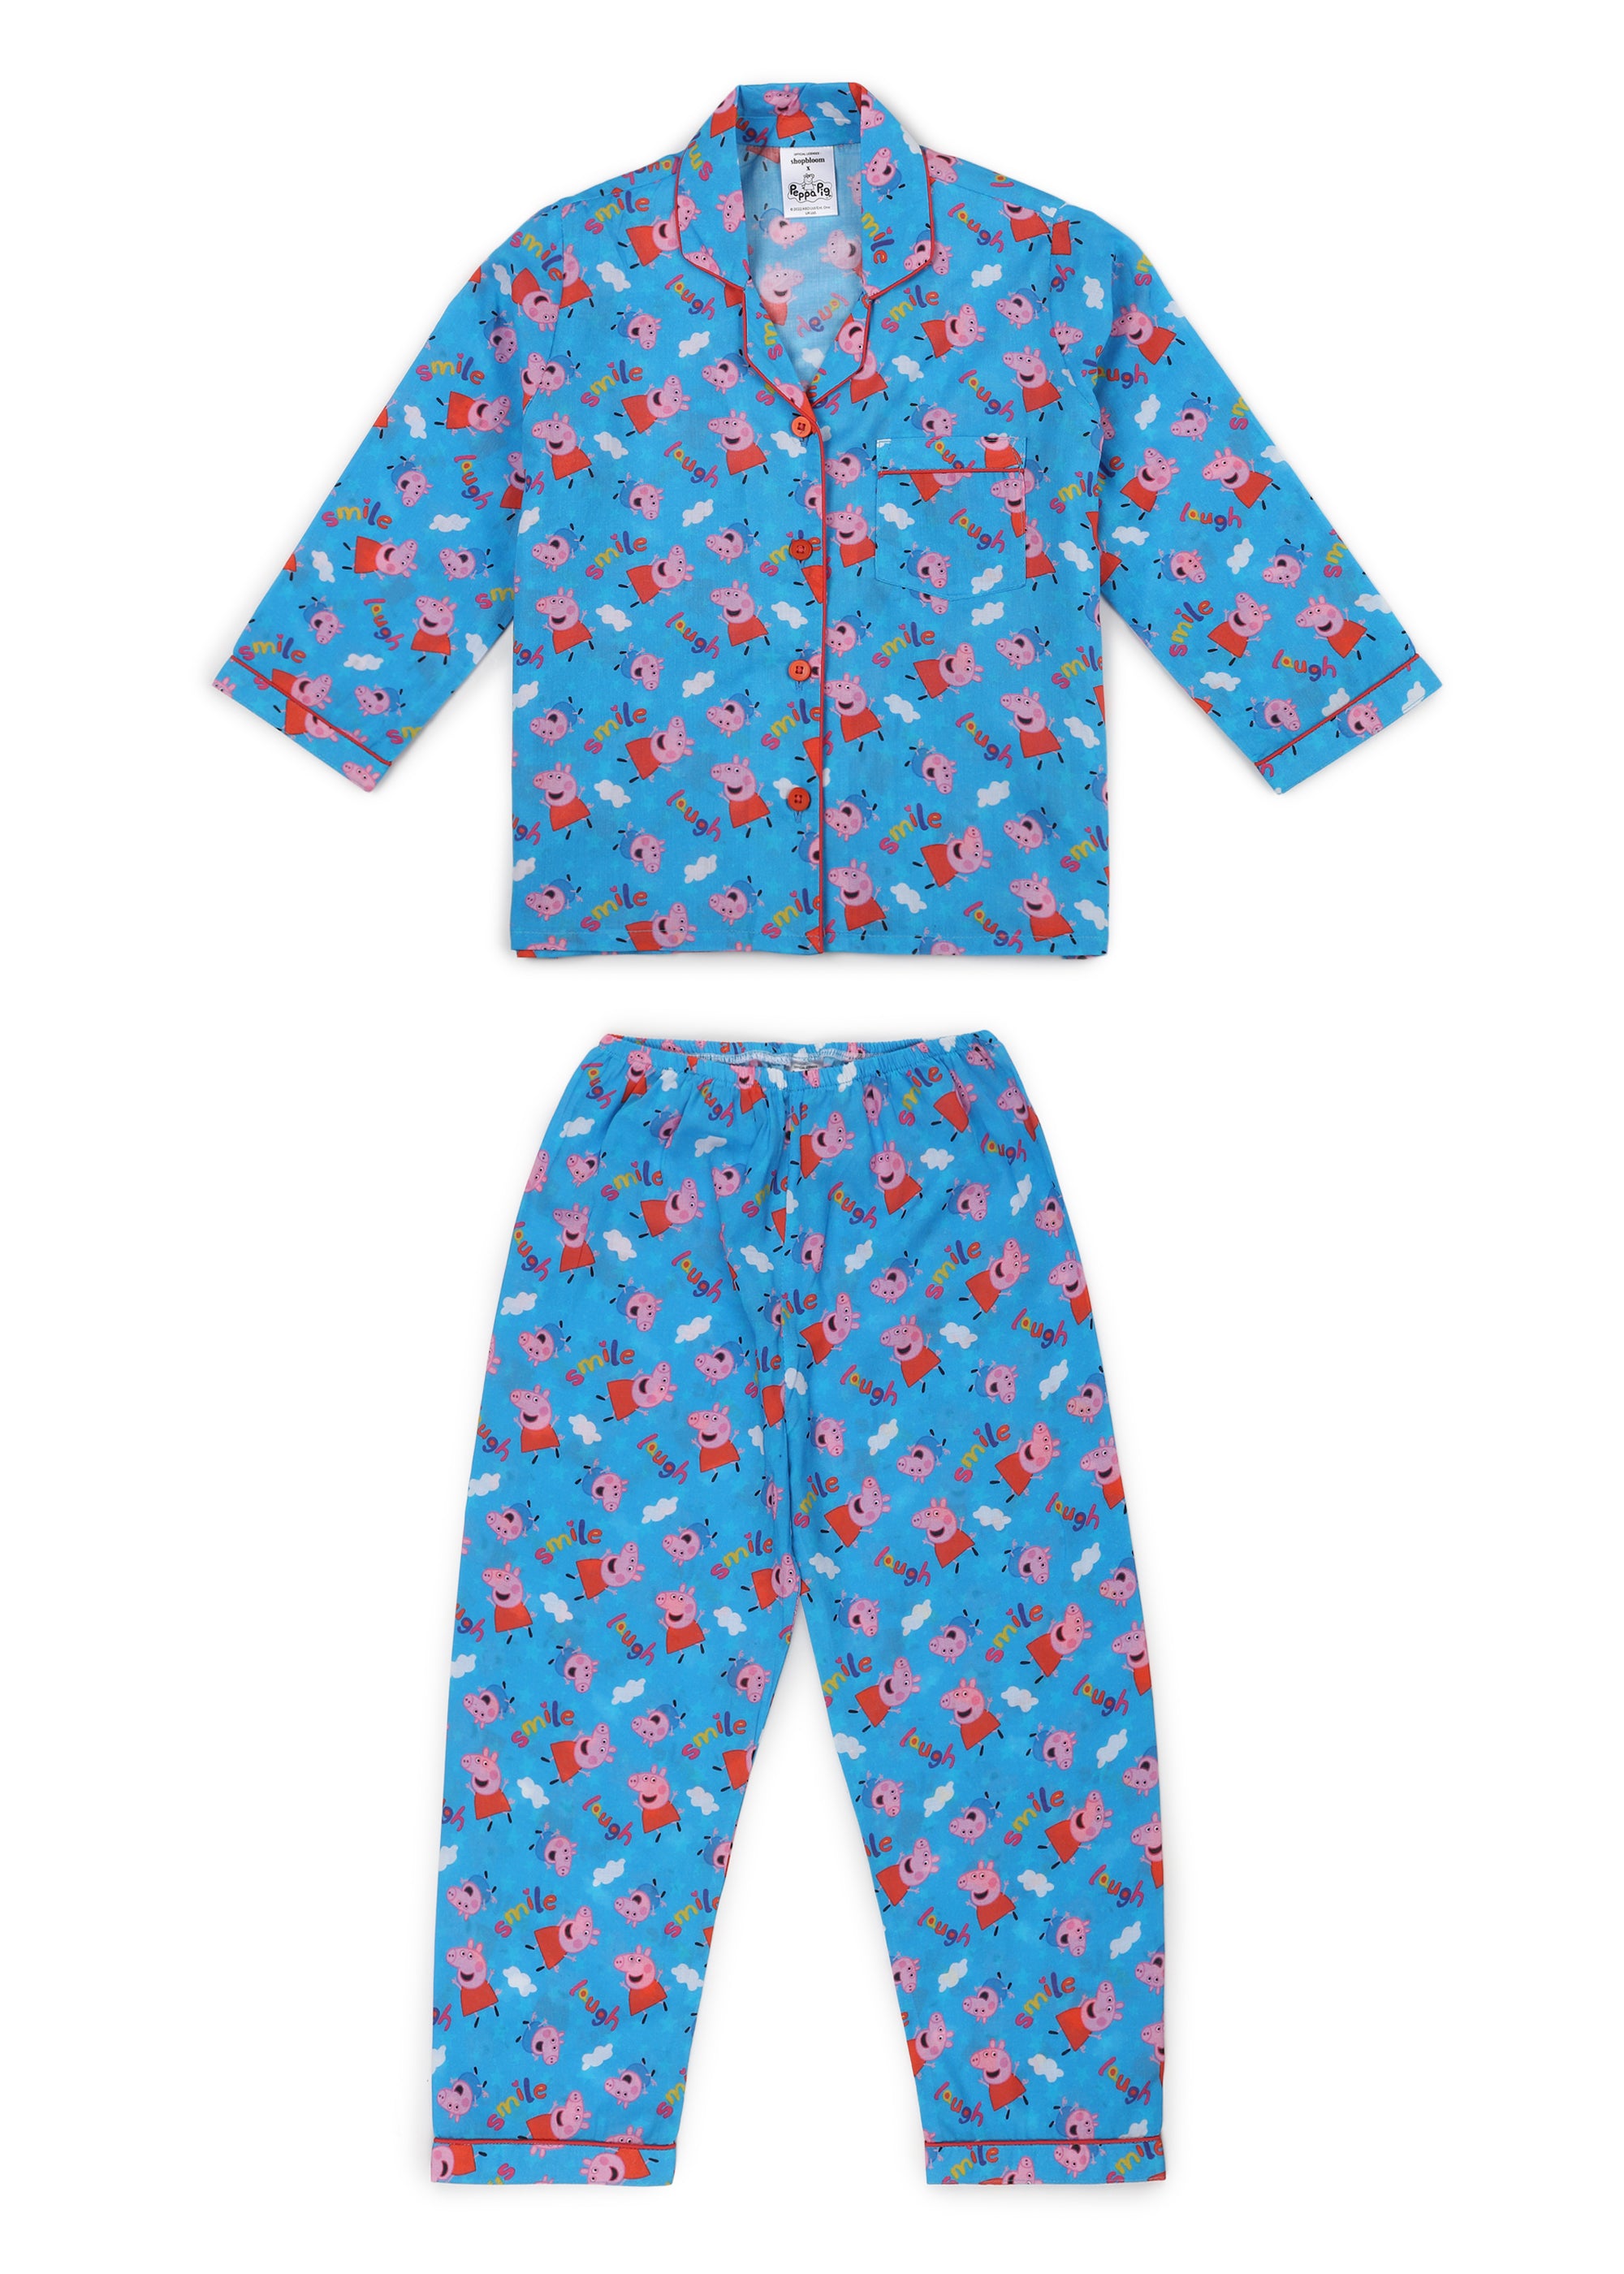 Peppa Laugh and Smile Print Long Sleeve Kids Night Suit - Shopbloom